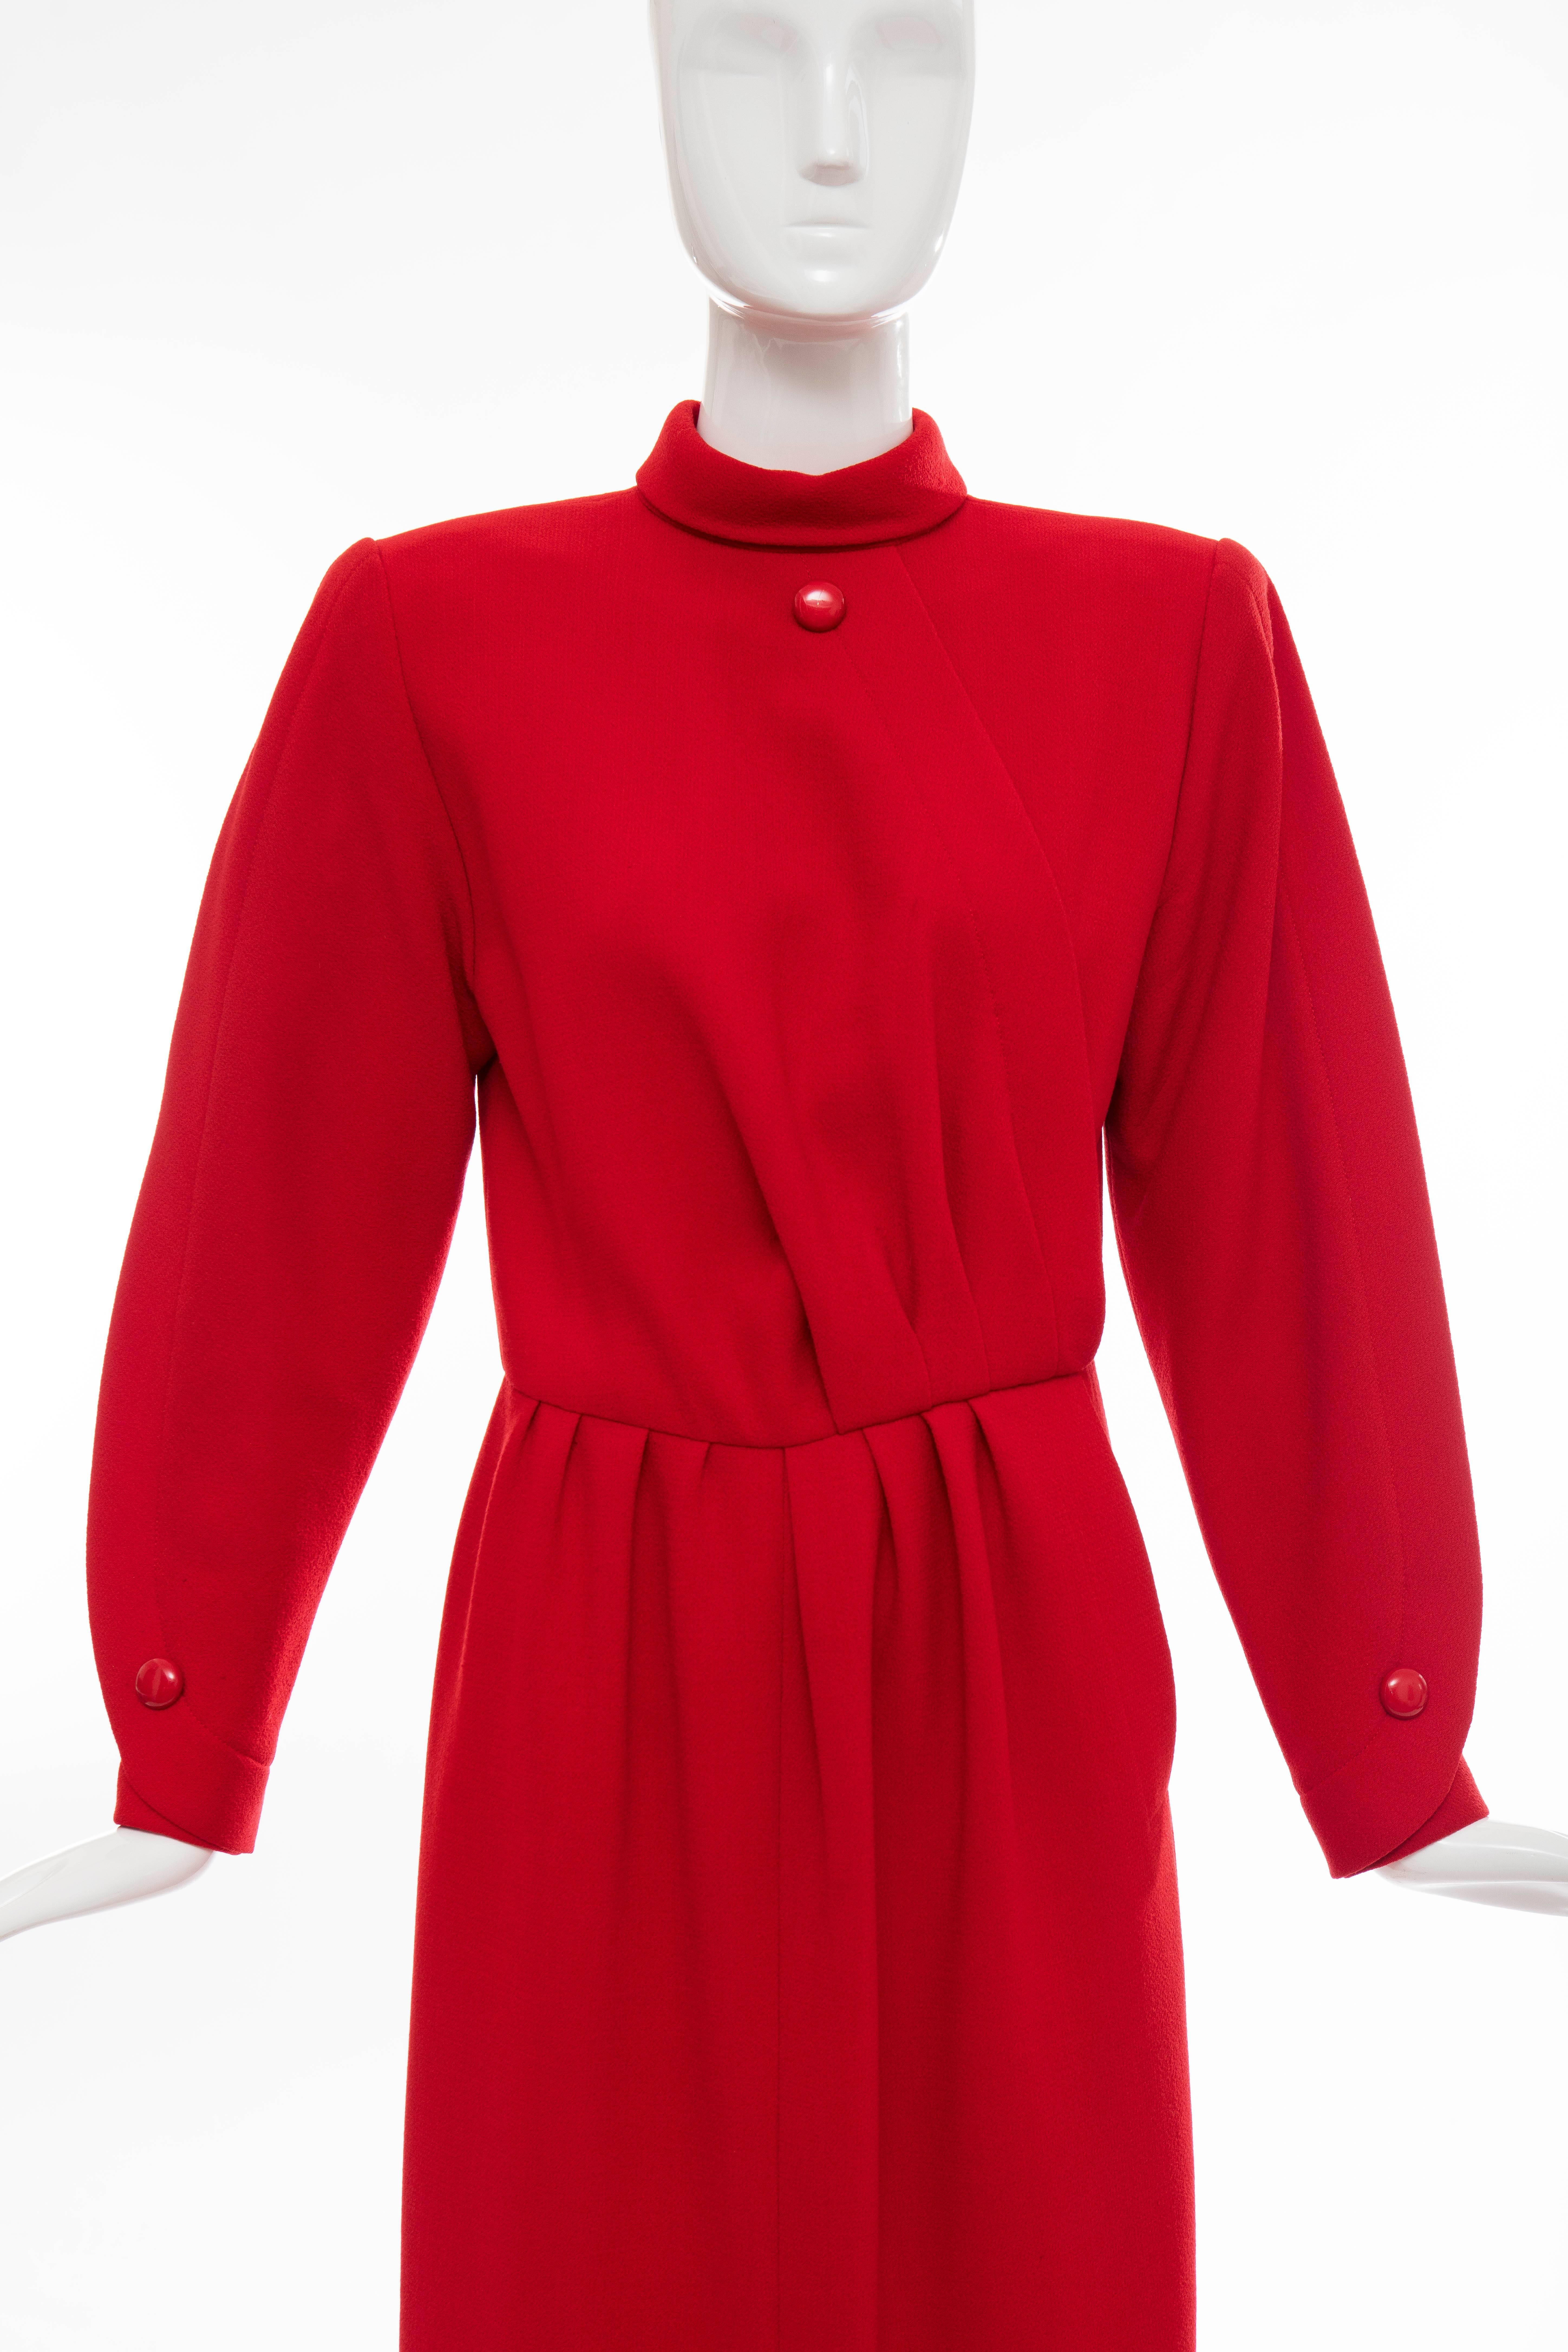 Women's Nina Ricci Haute Couture Red Wool Crepe Dress, Circa 1980's For Sale